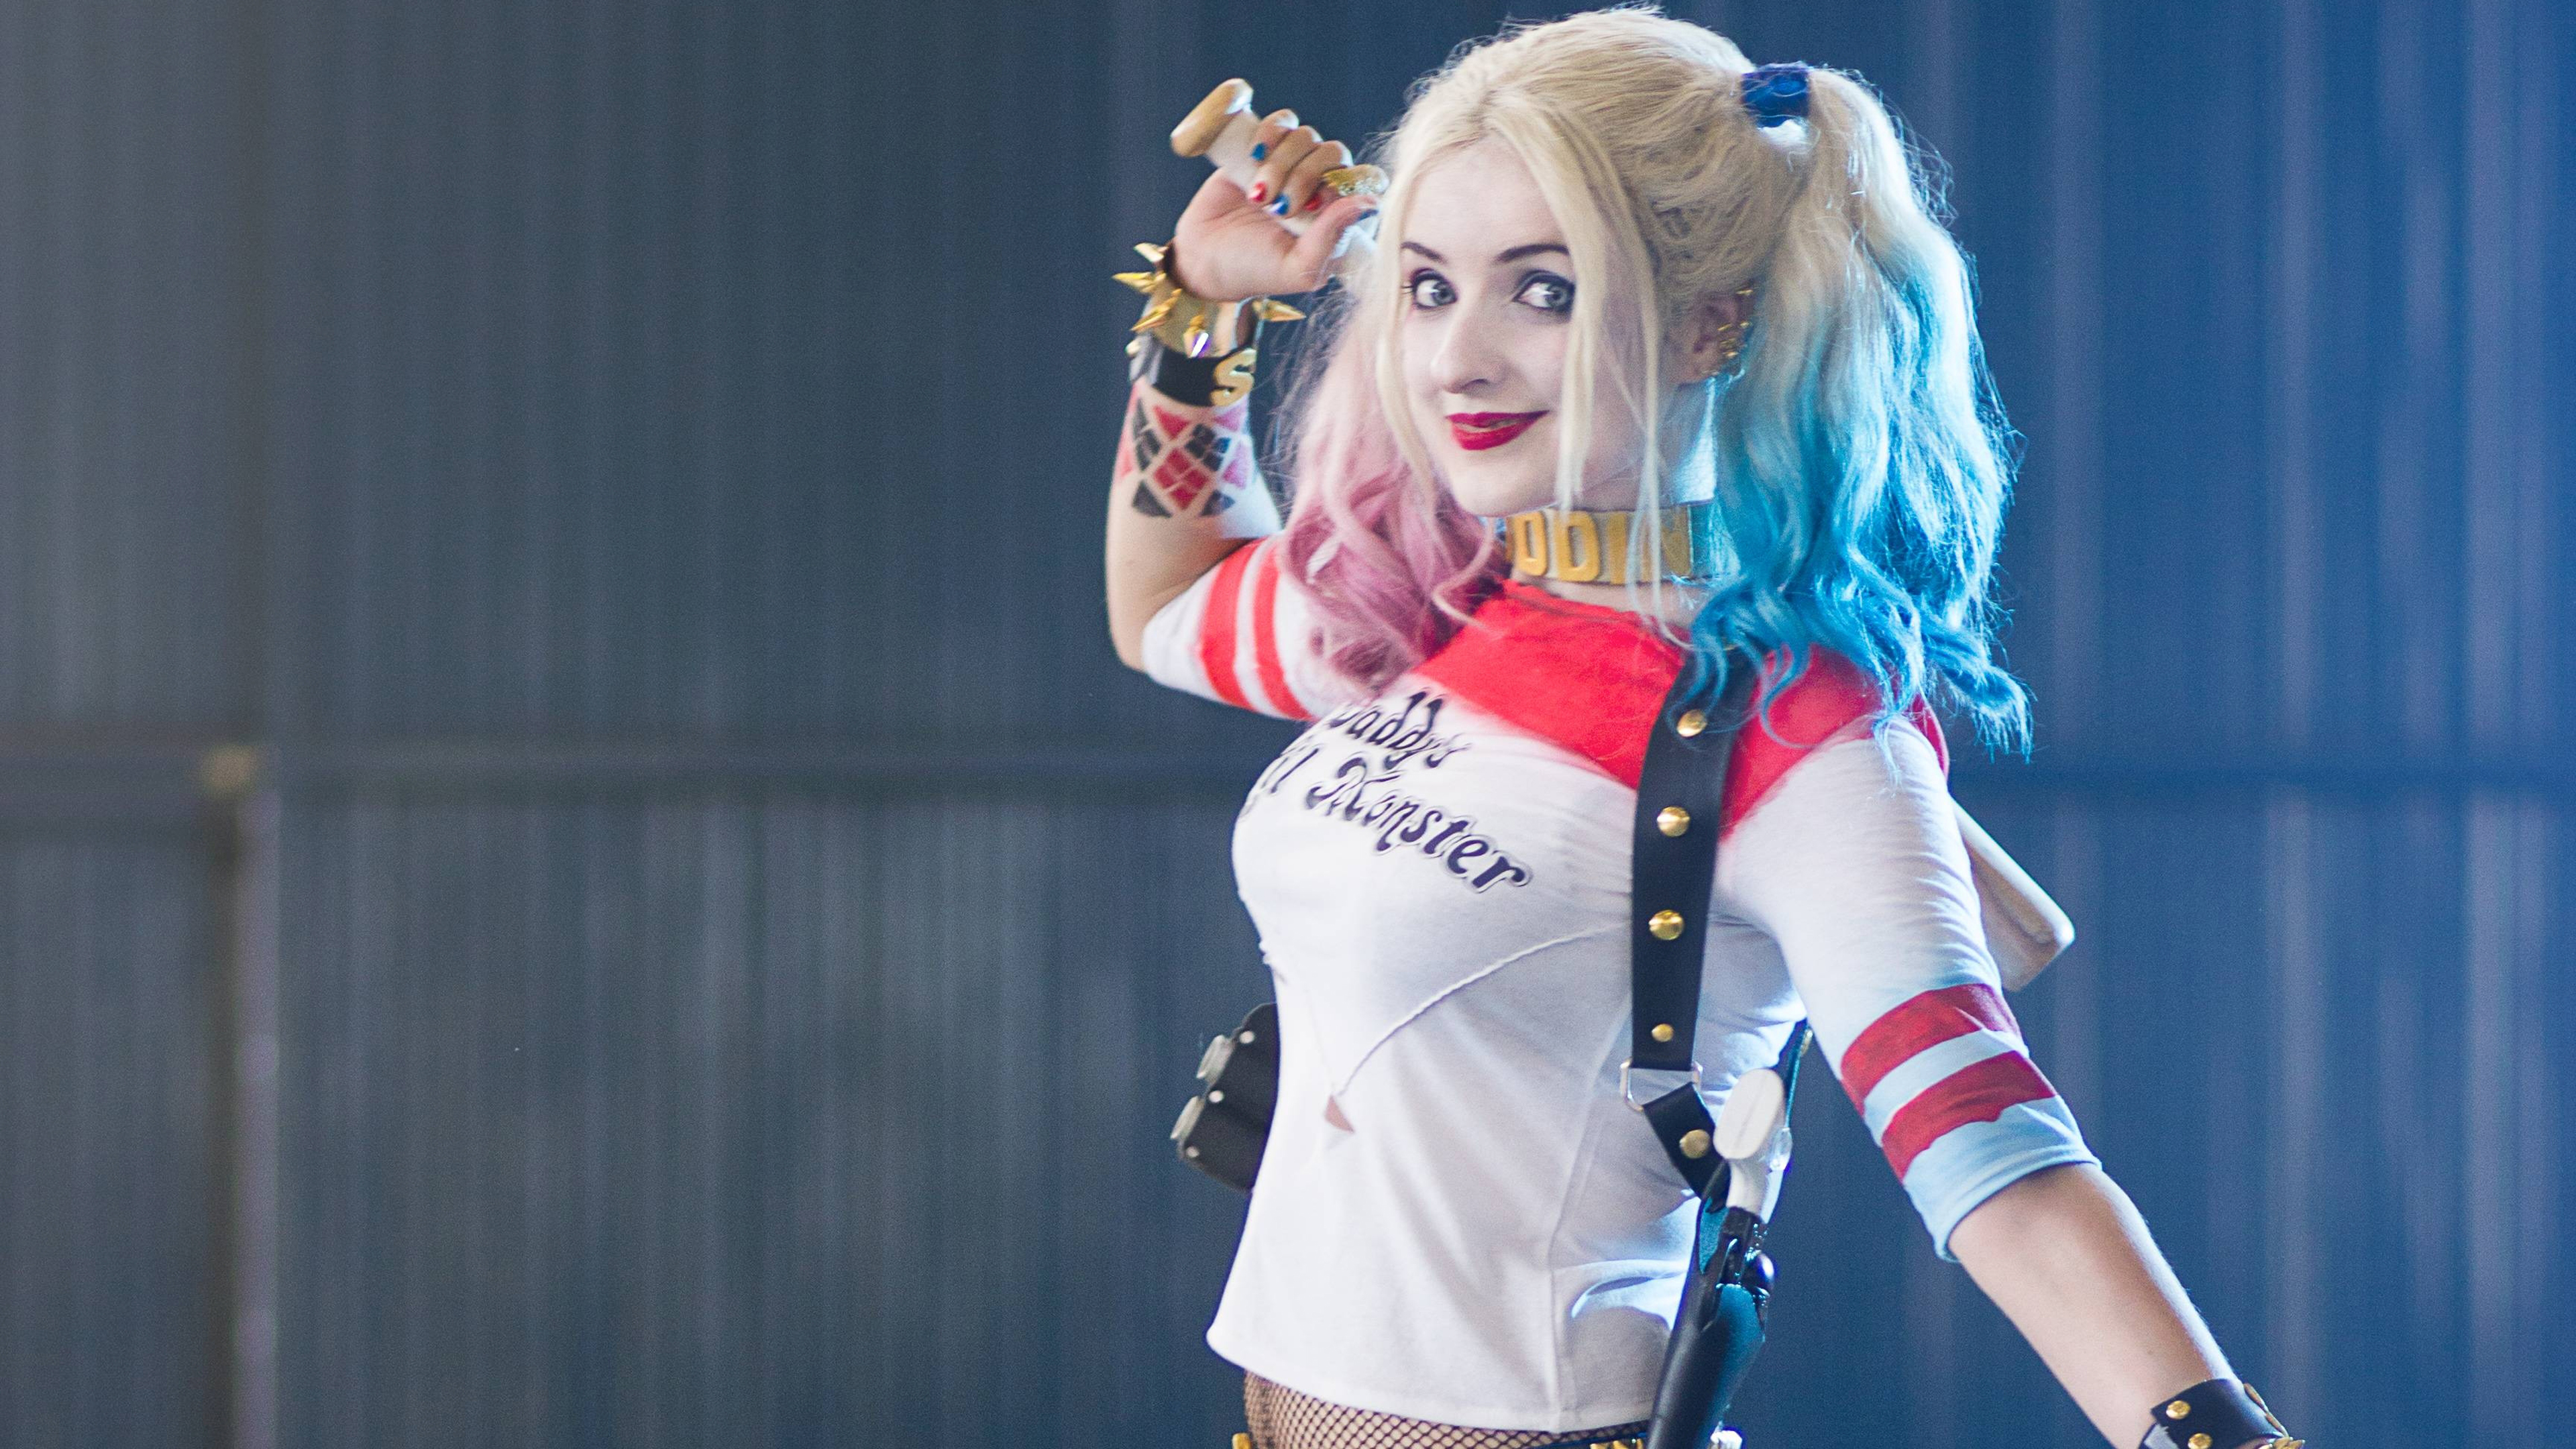 Harley Quinn Is Wearing Red And White Short T-Shirt K HD Harley Quinn